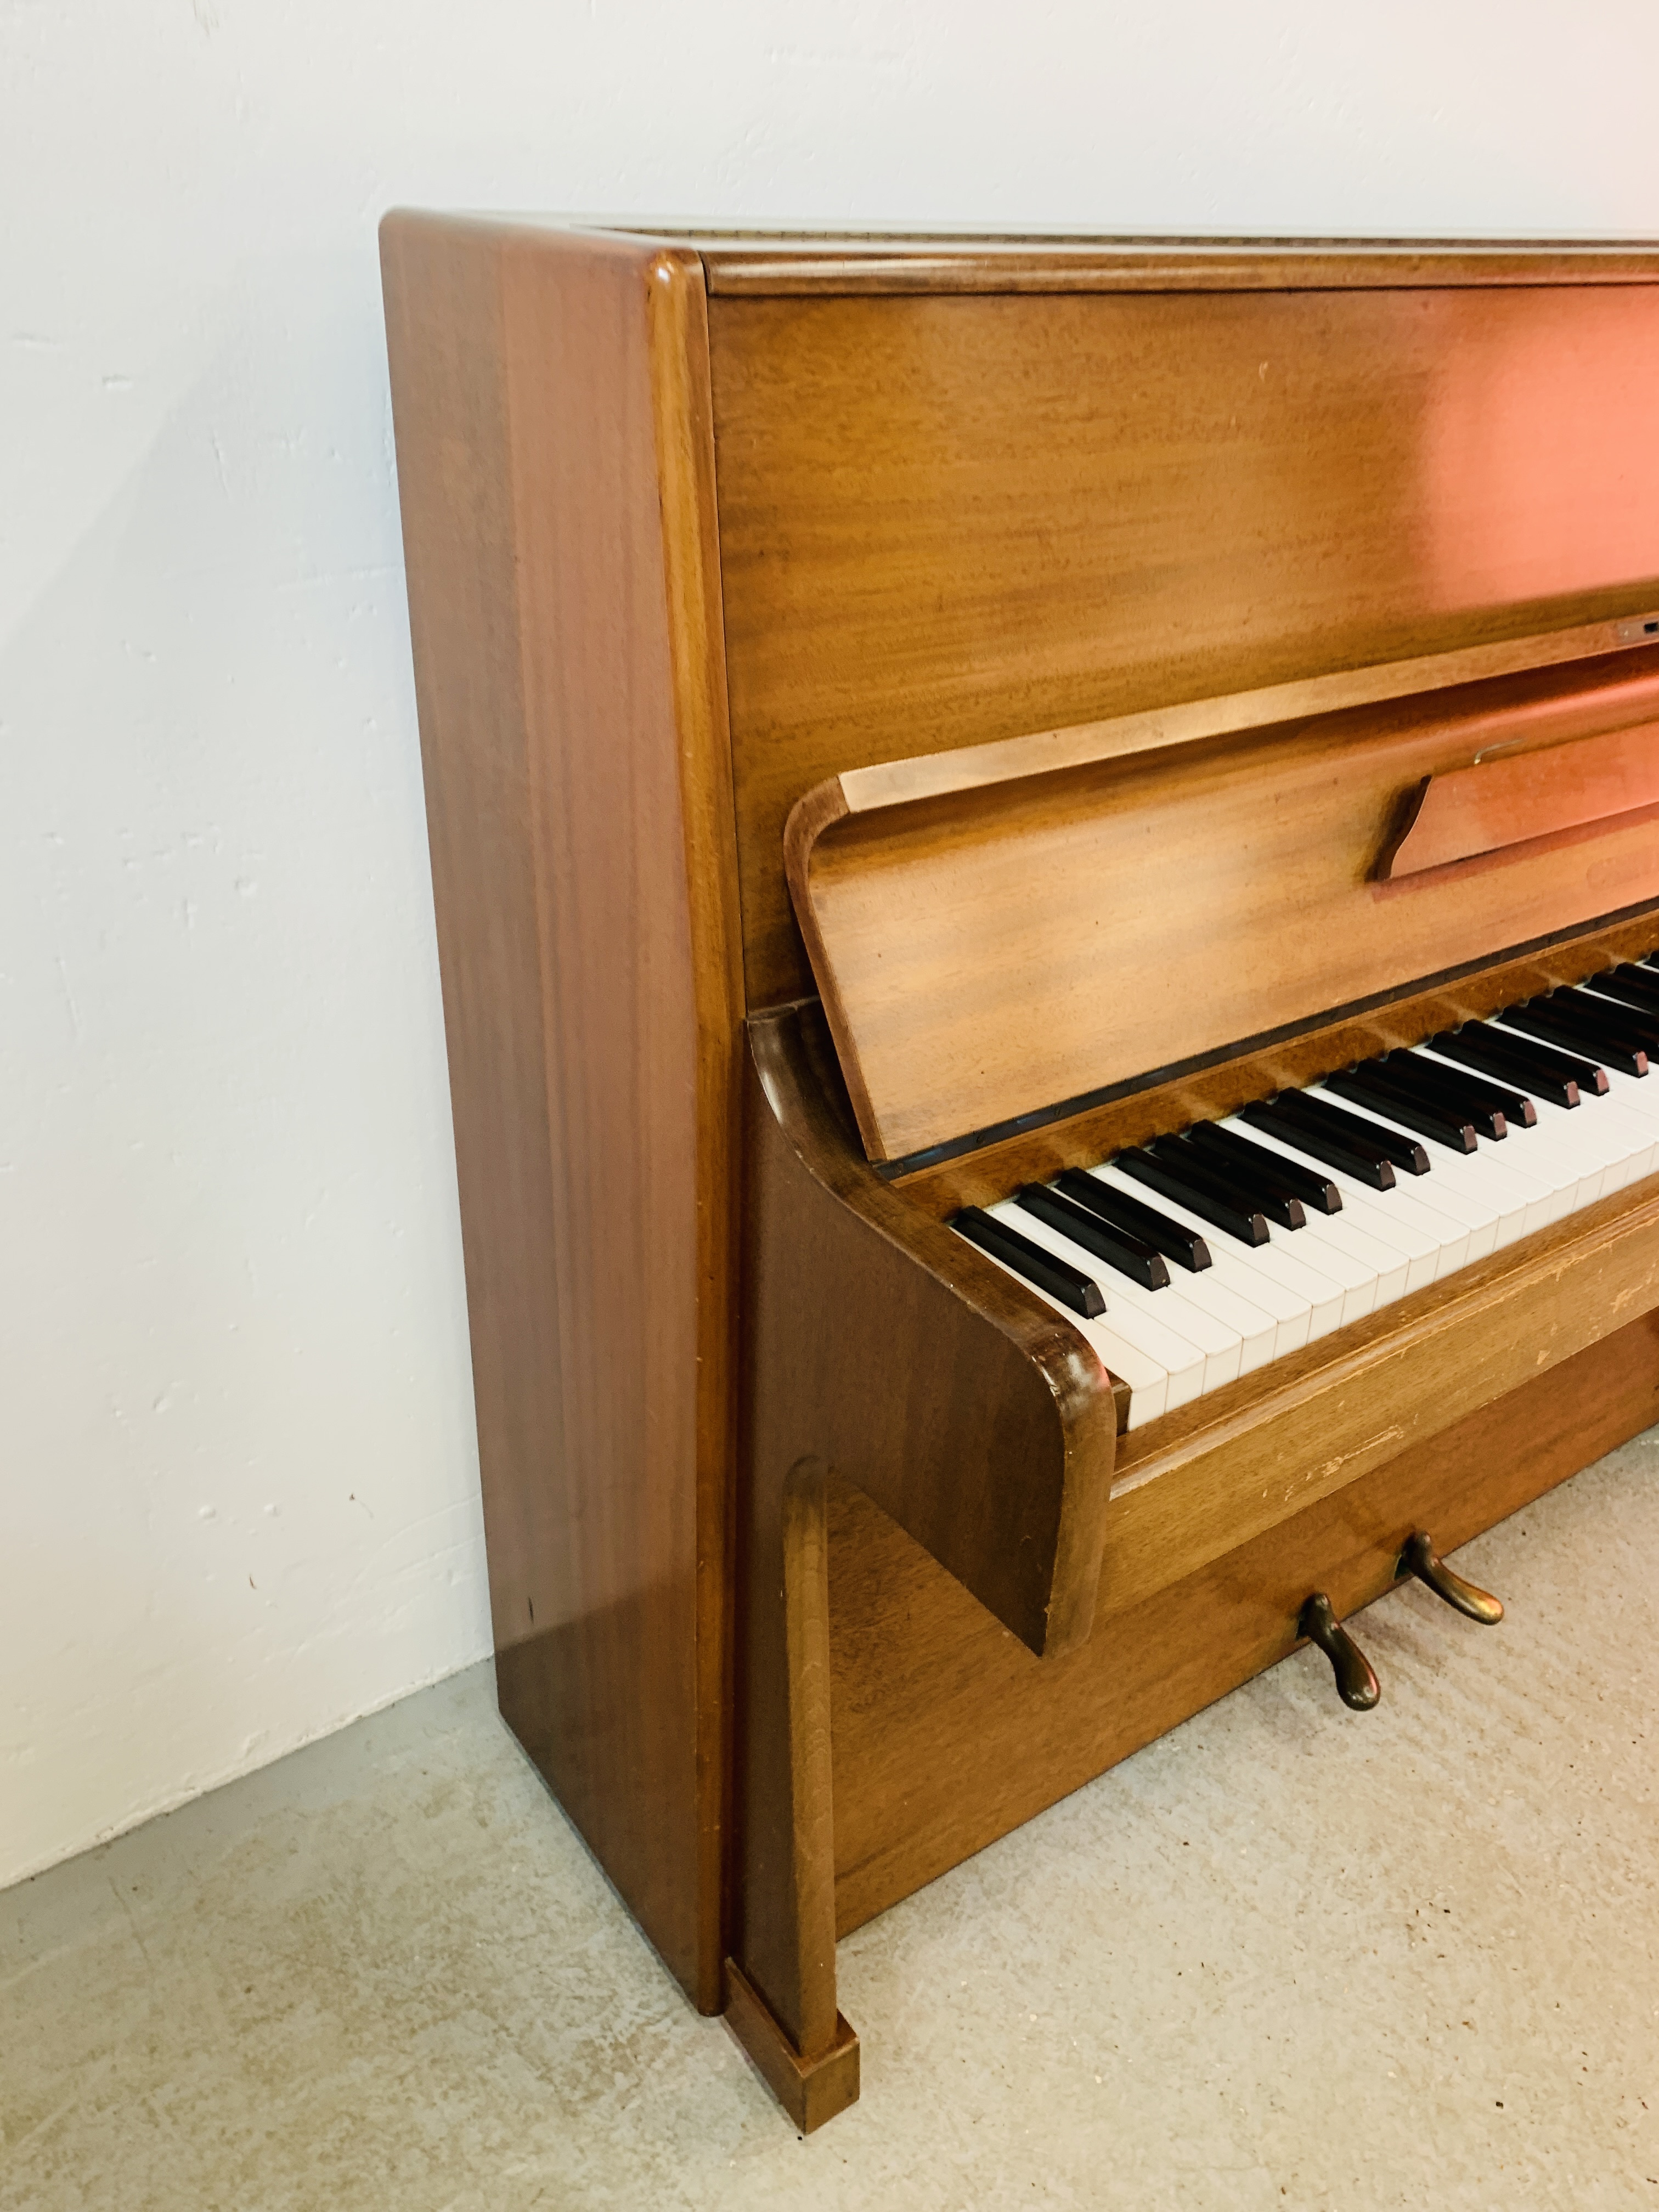 A CHAPPELL UPRIGHT OVERSTRUNG PIANO - Image 9 of 16